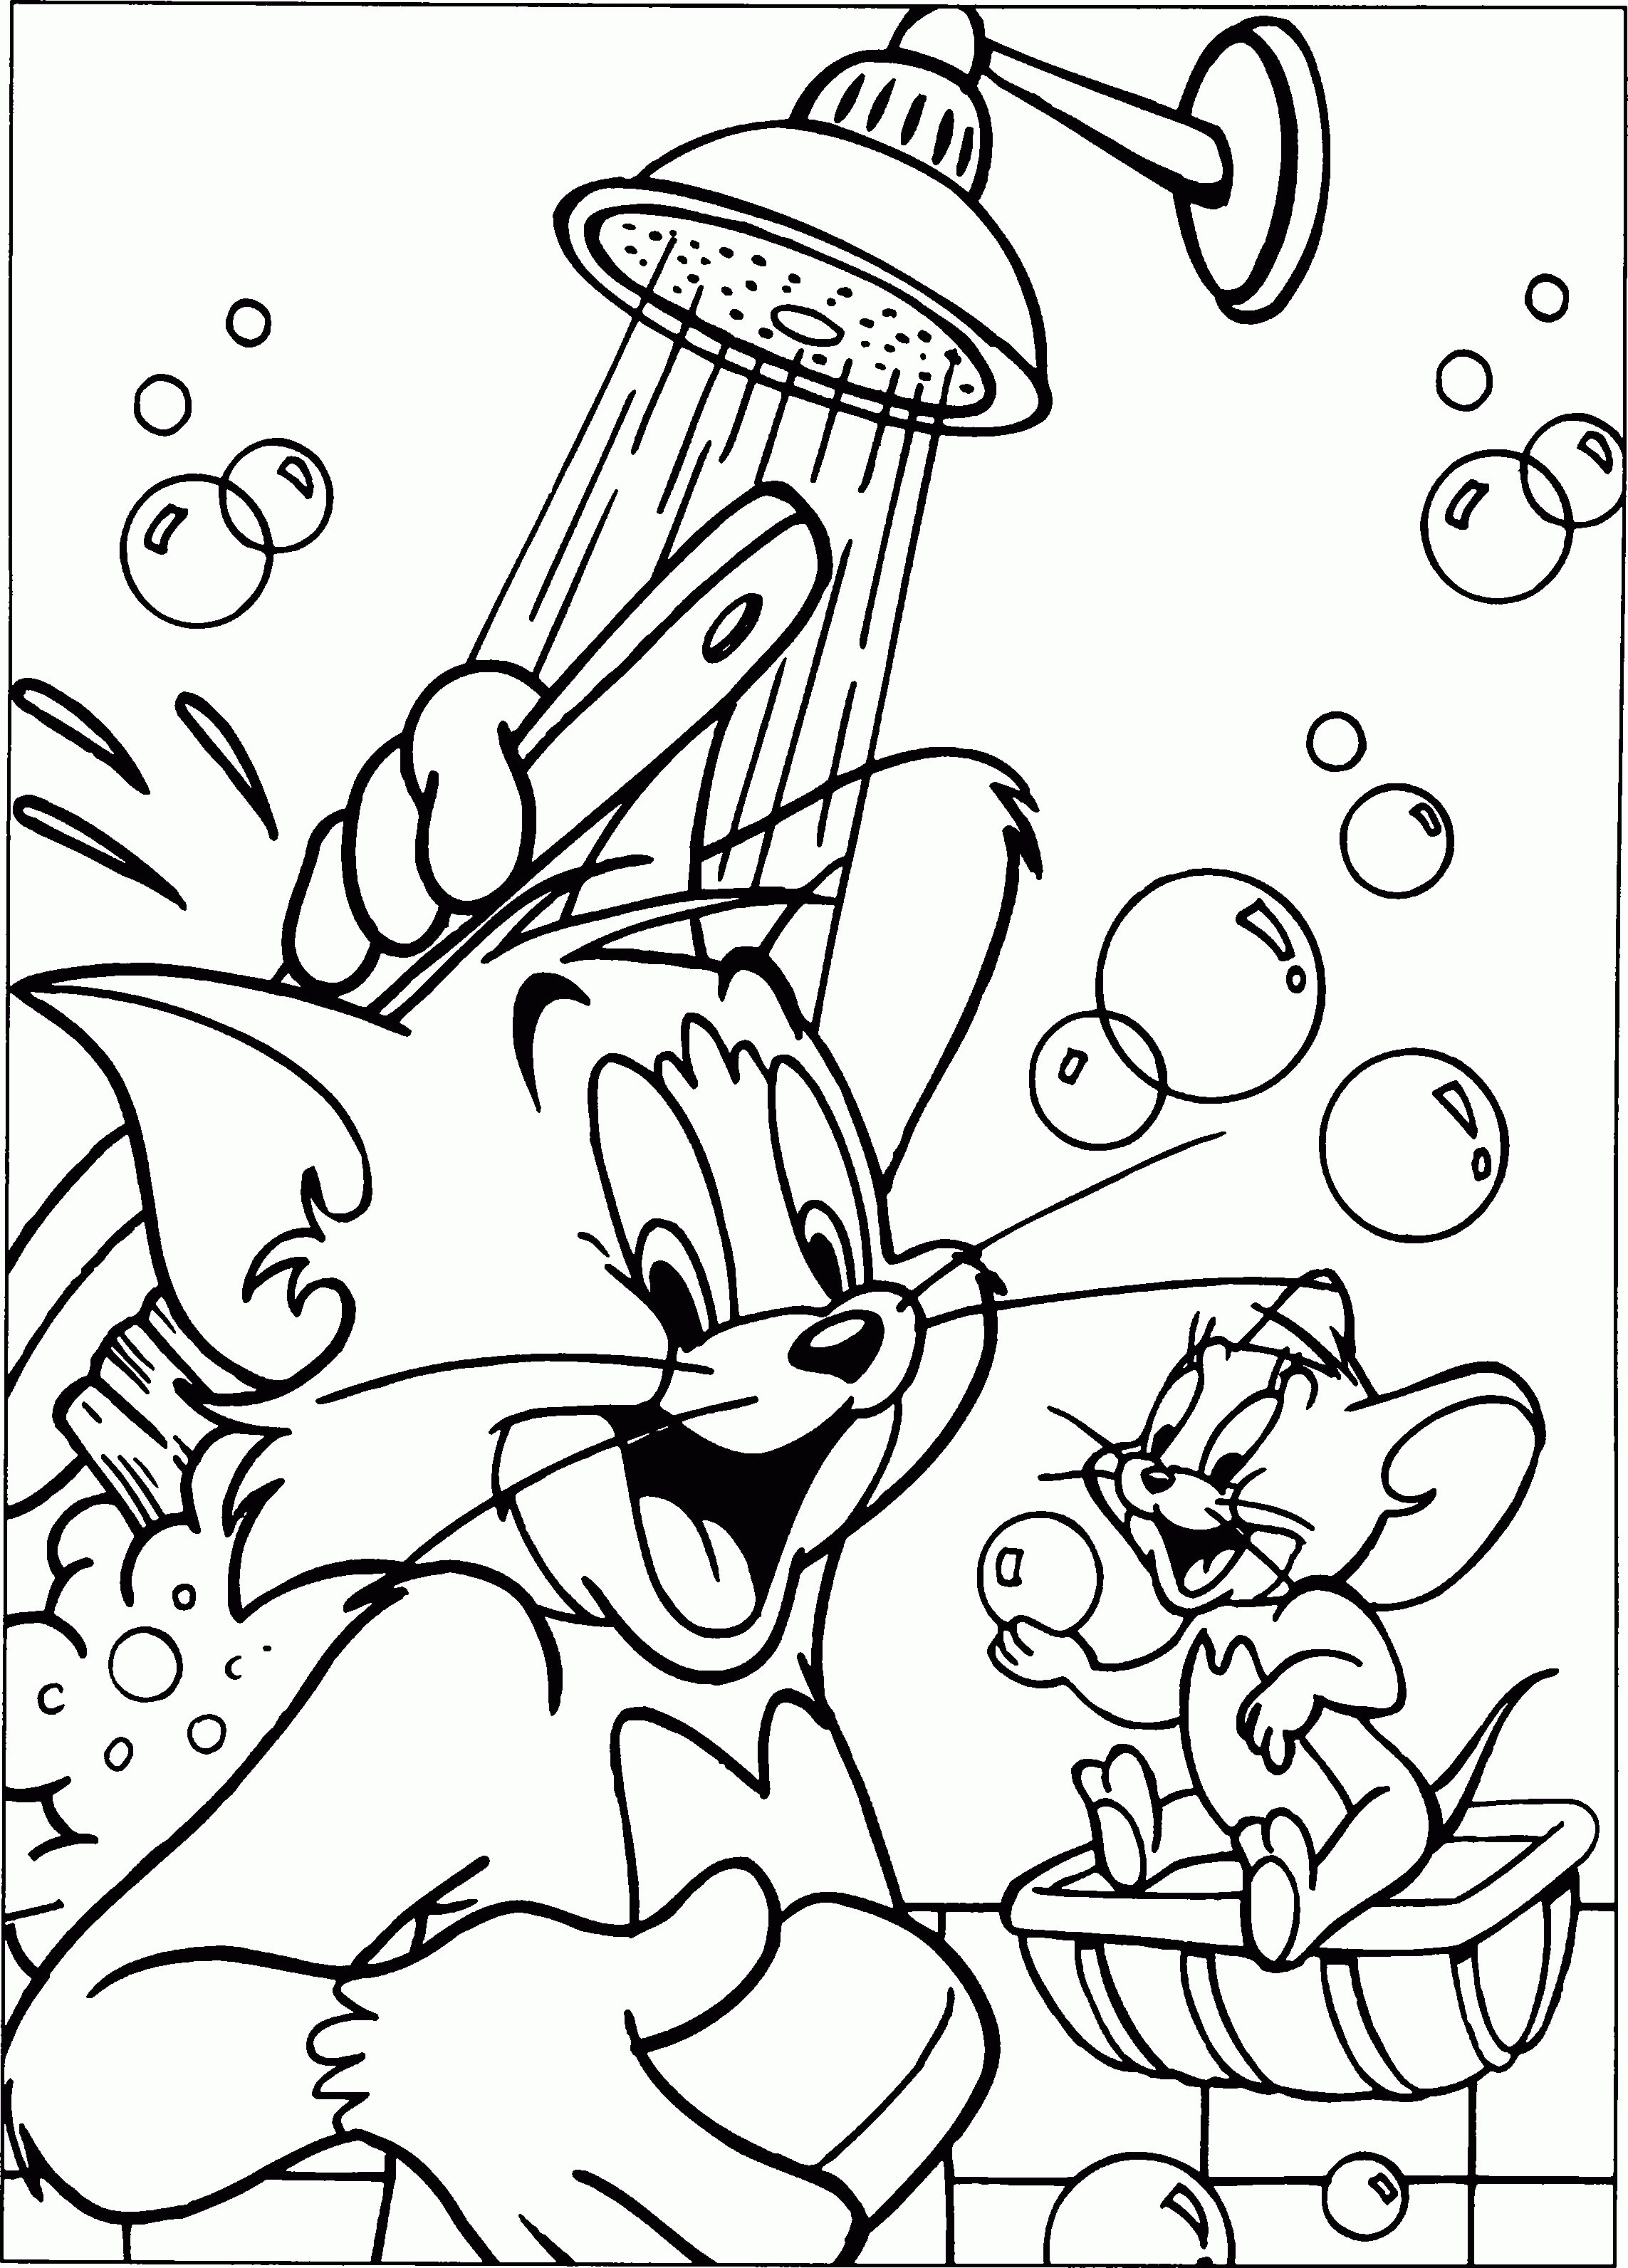 Related Tom And Jerry Coloring Pages Item14069, Tom And Jerry